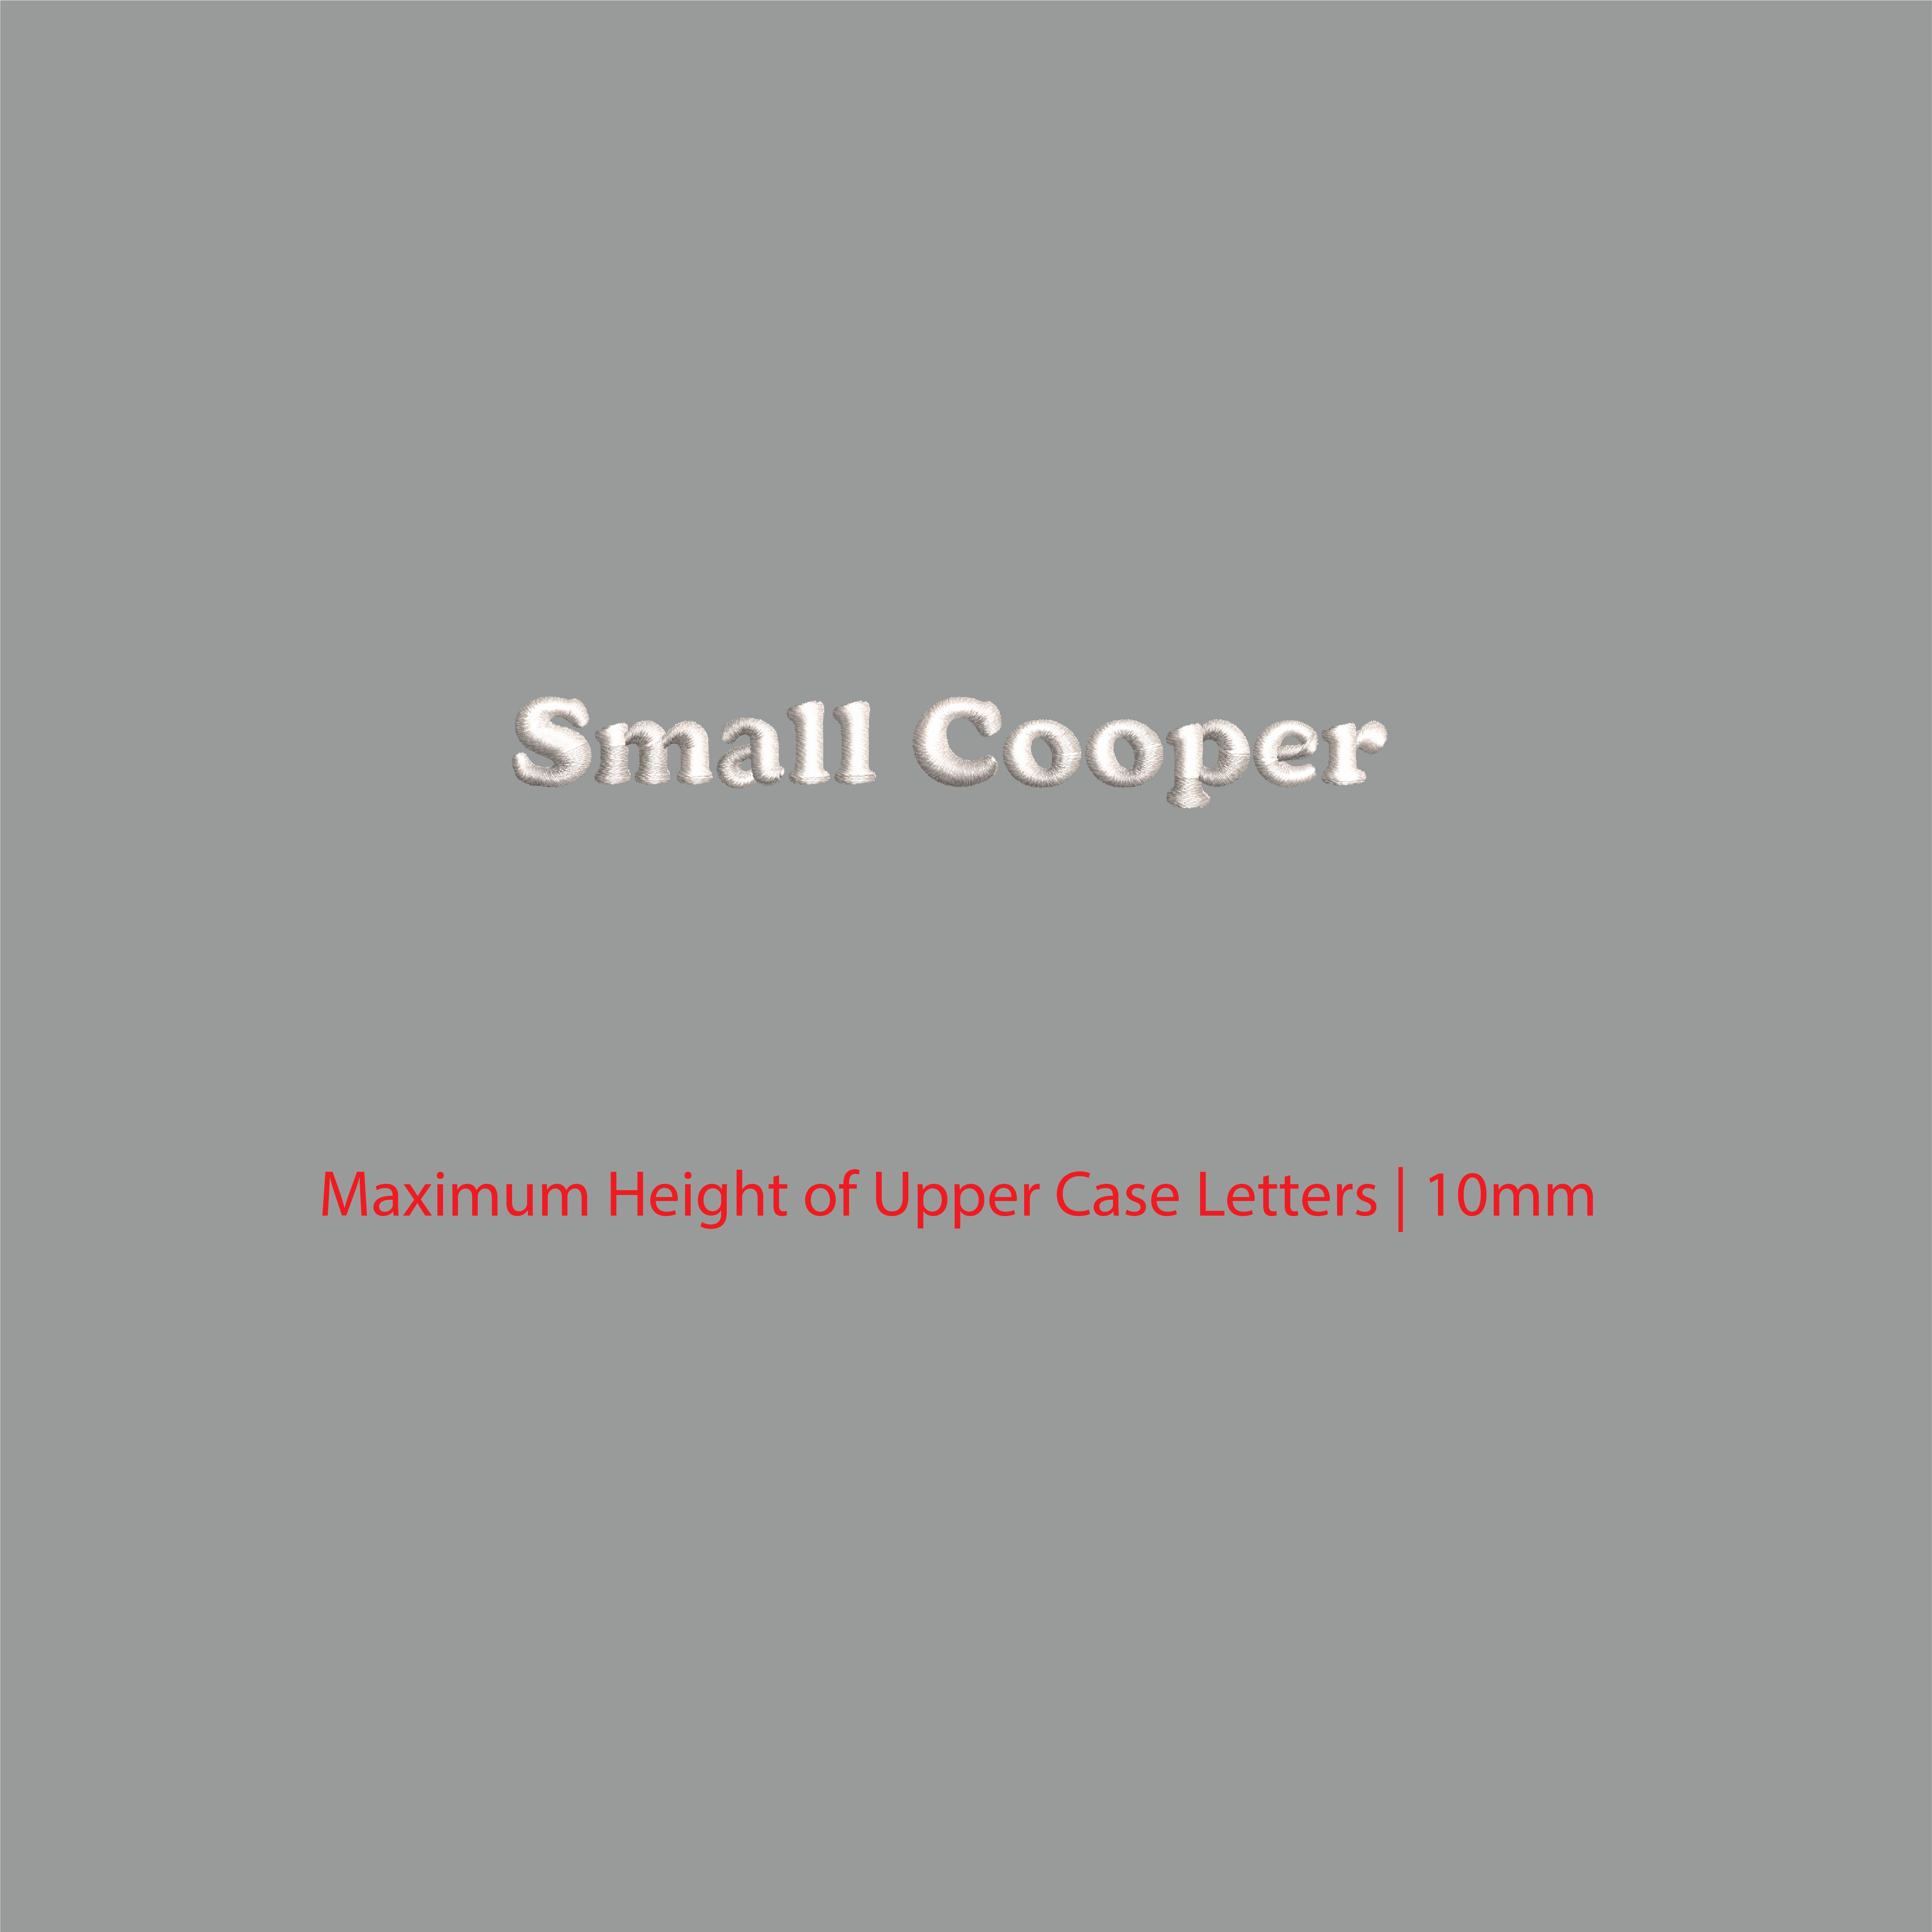 House of Uniforms Embroidery | Personal Names | Small House of Uniforms SM Cooper